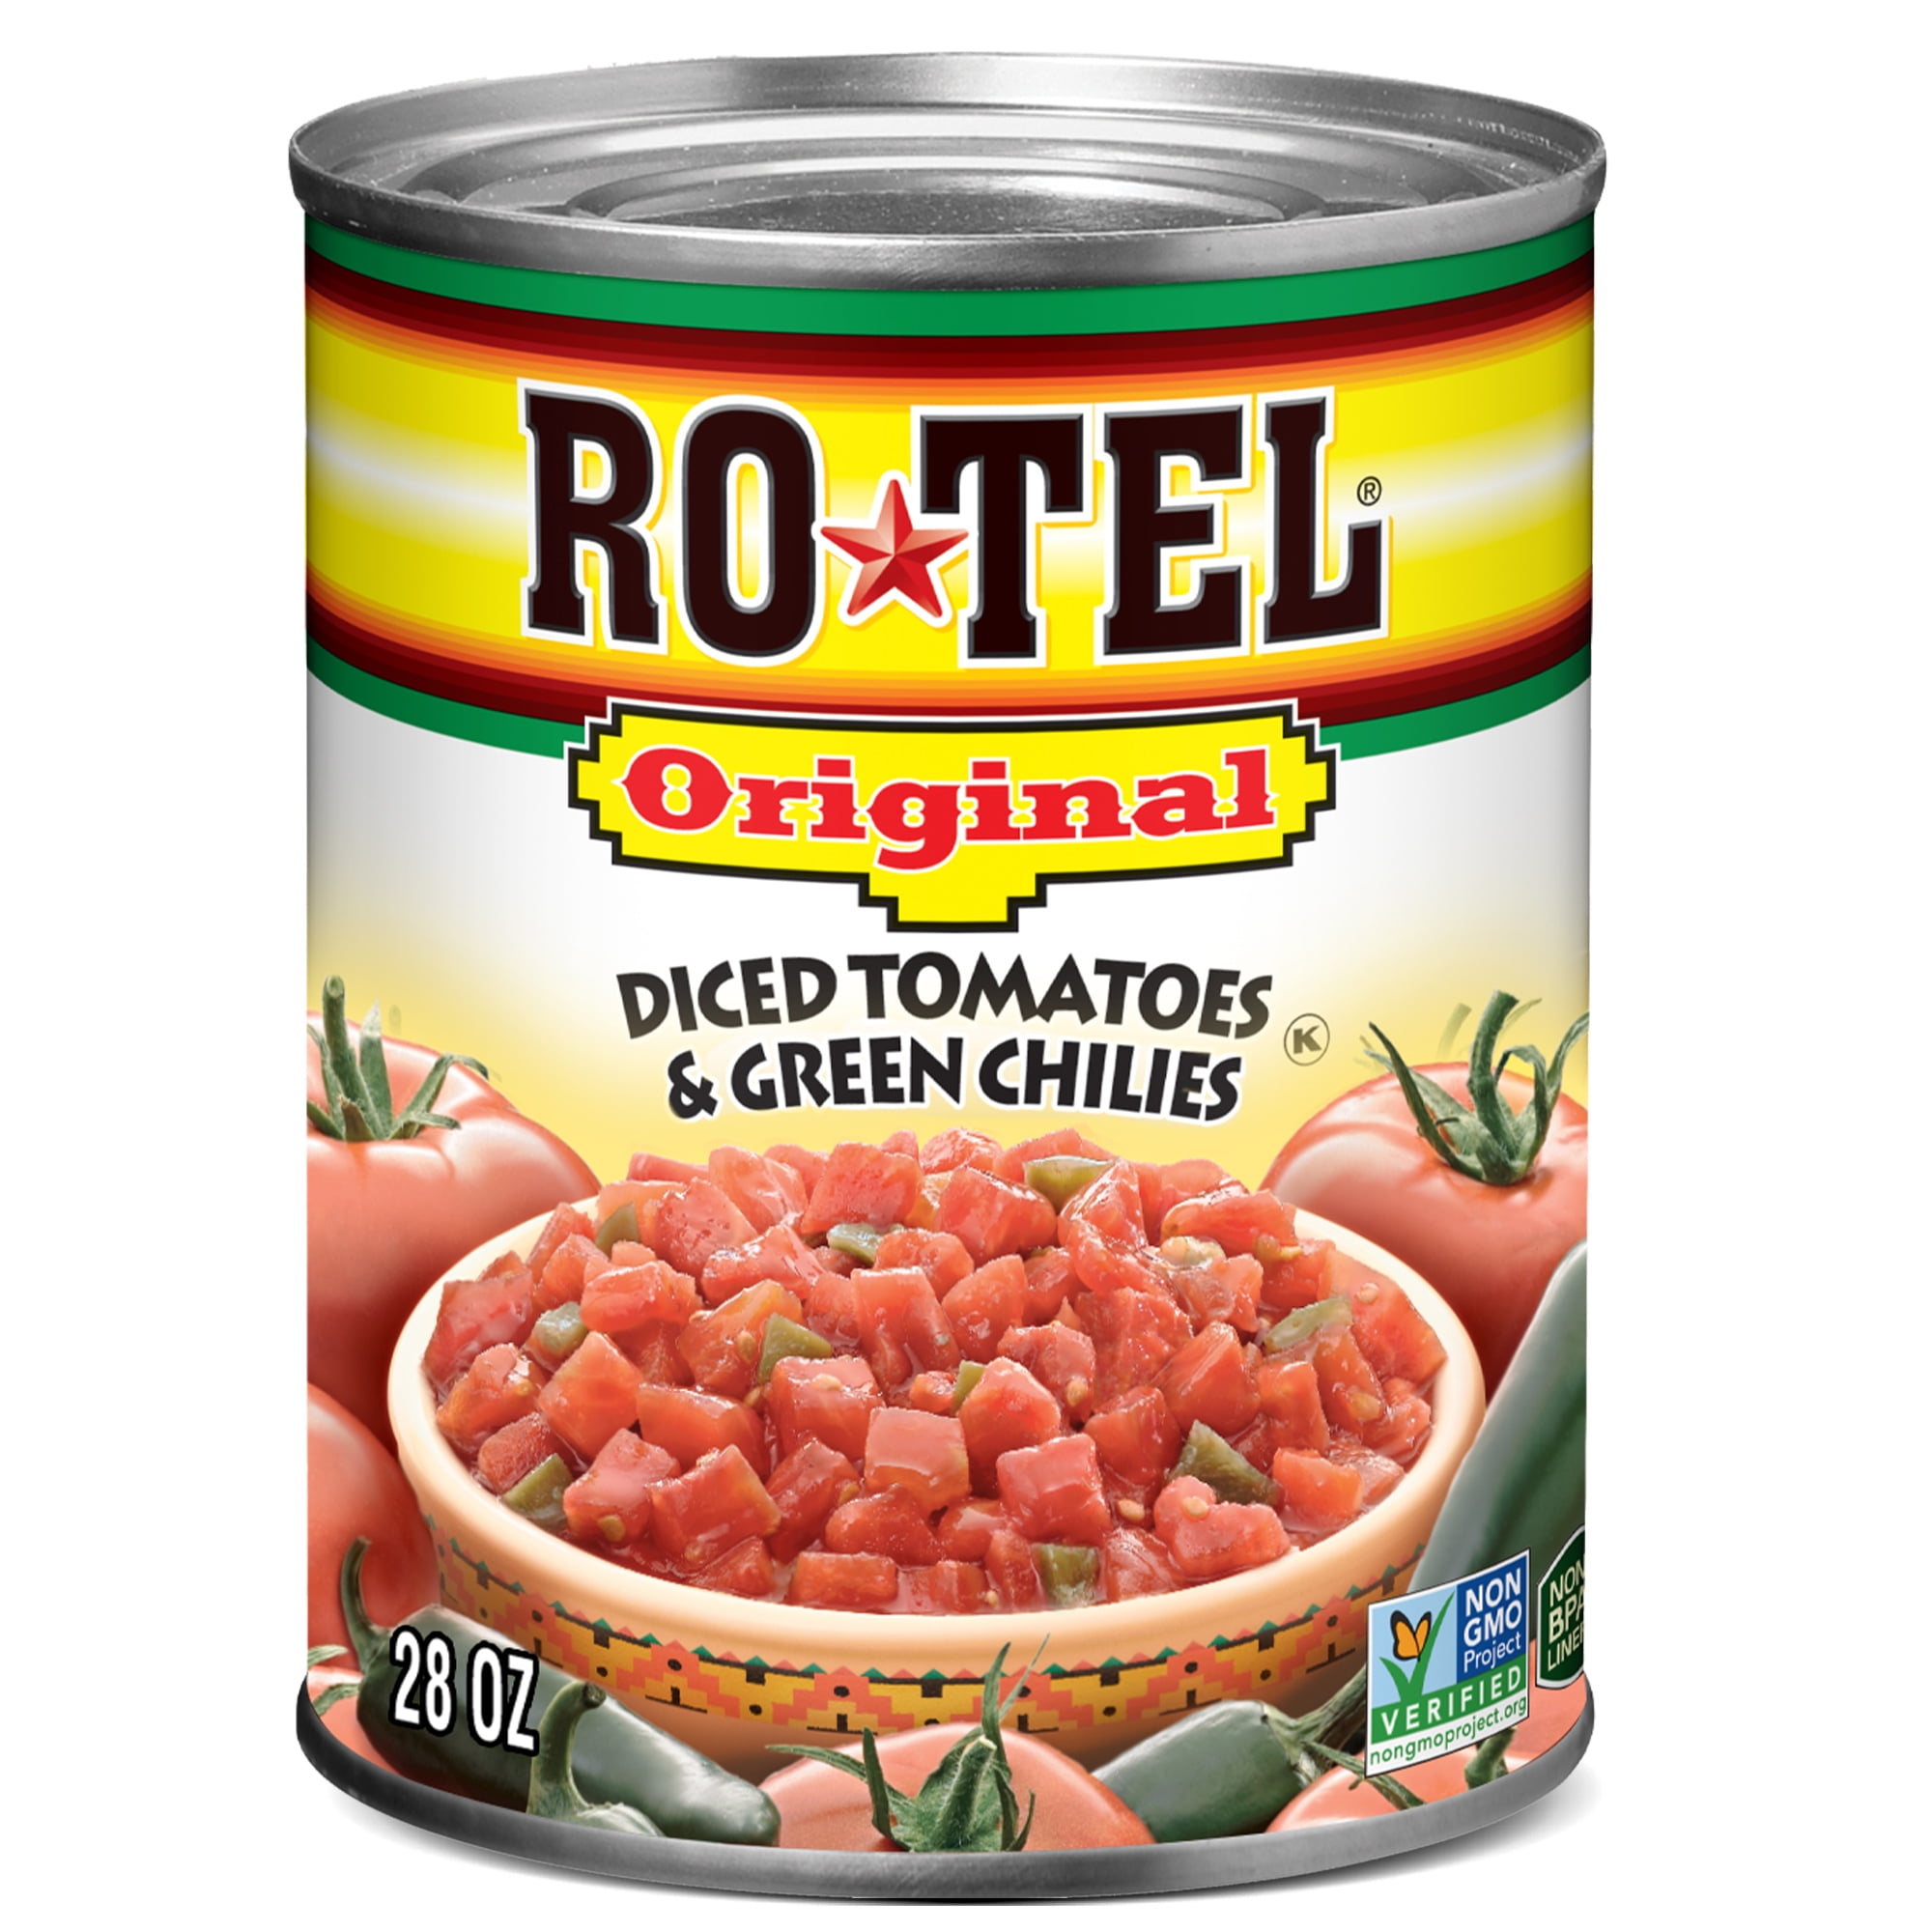 Rotel Original Diced Tomatoes and Green Chilies, 28 oz.